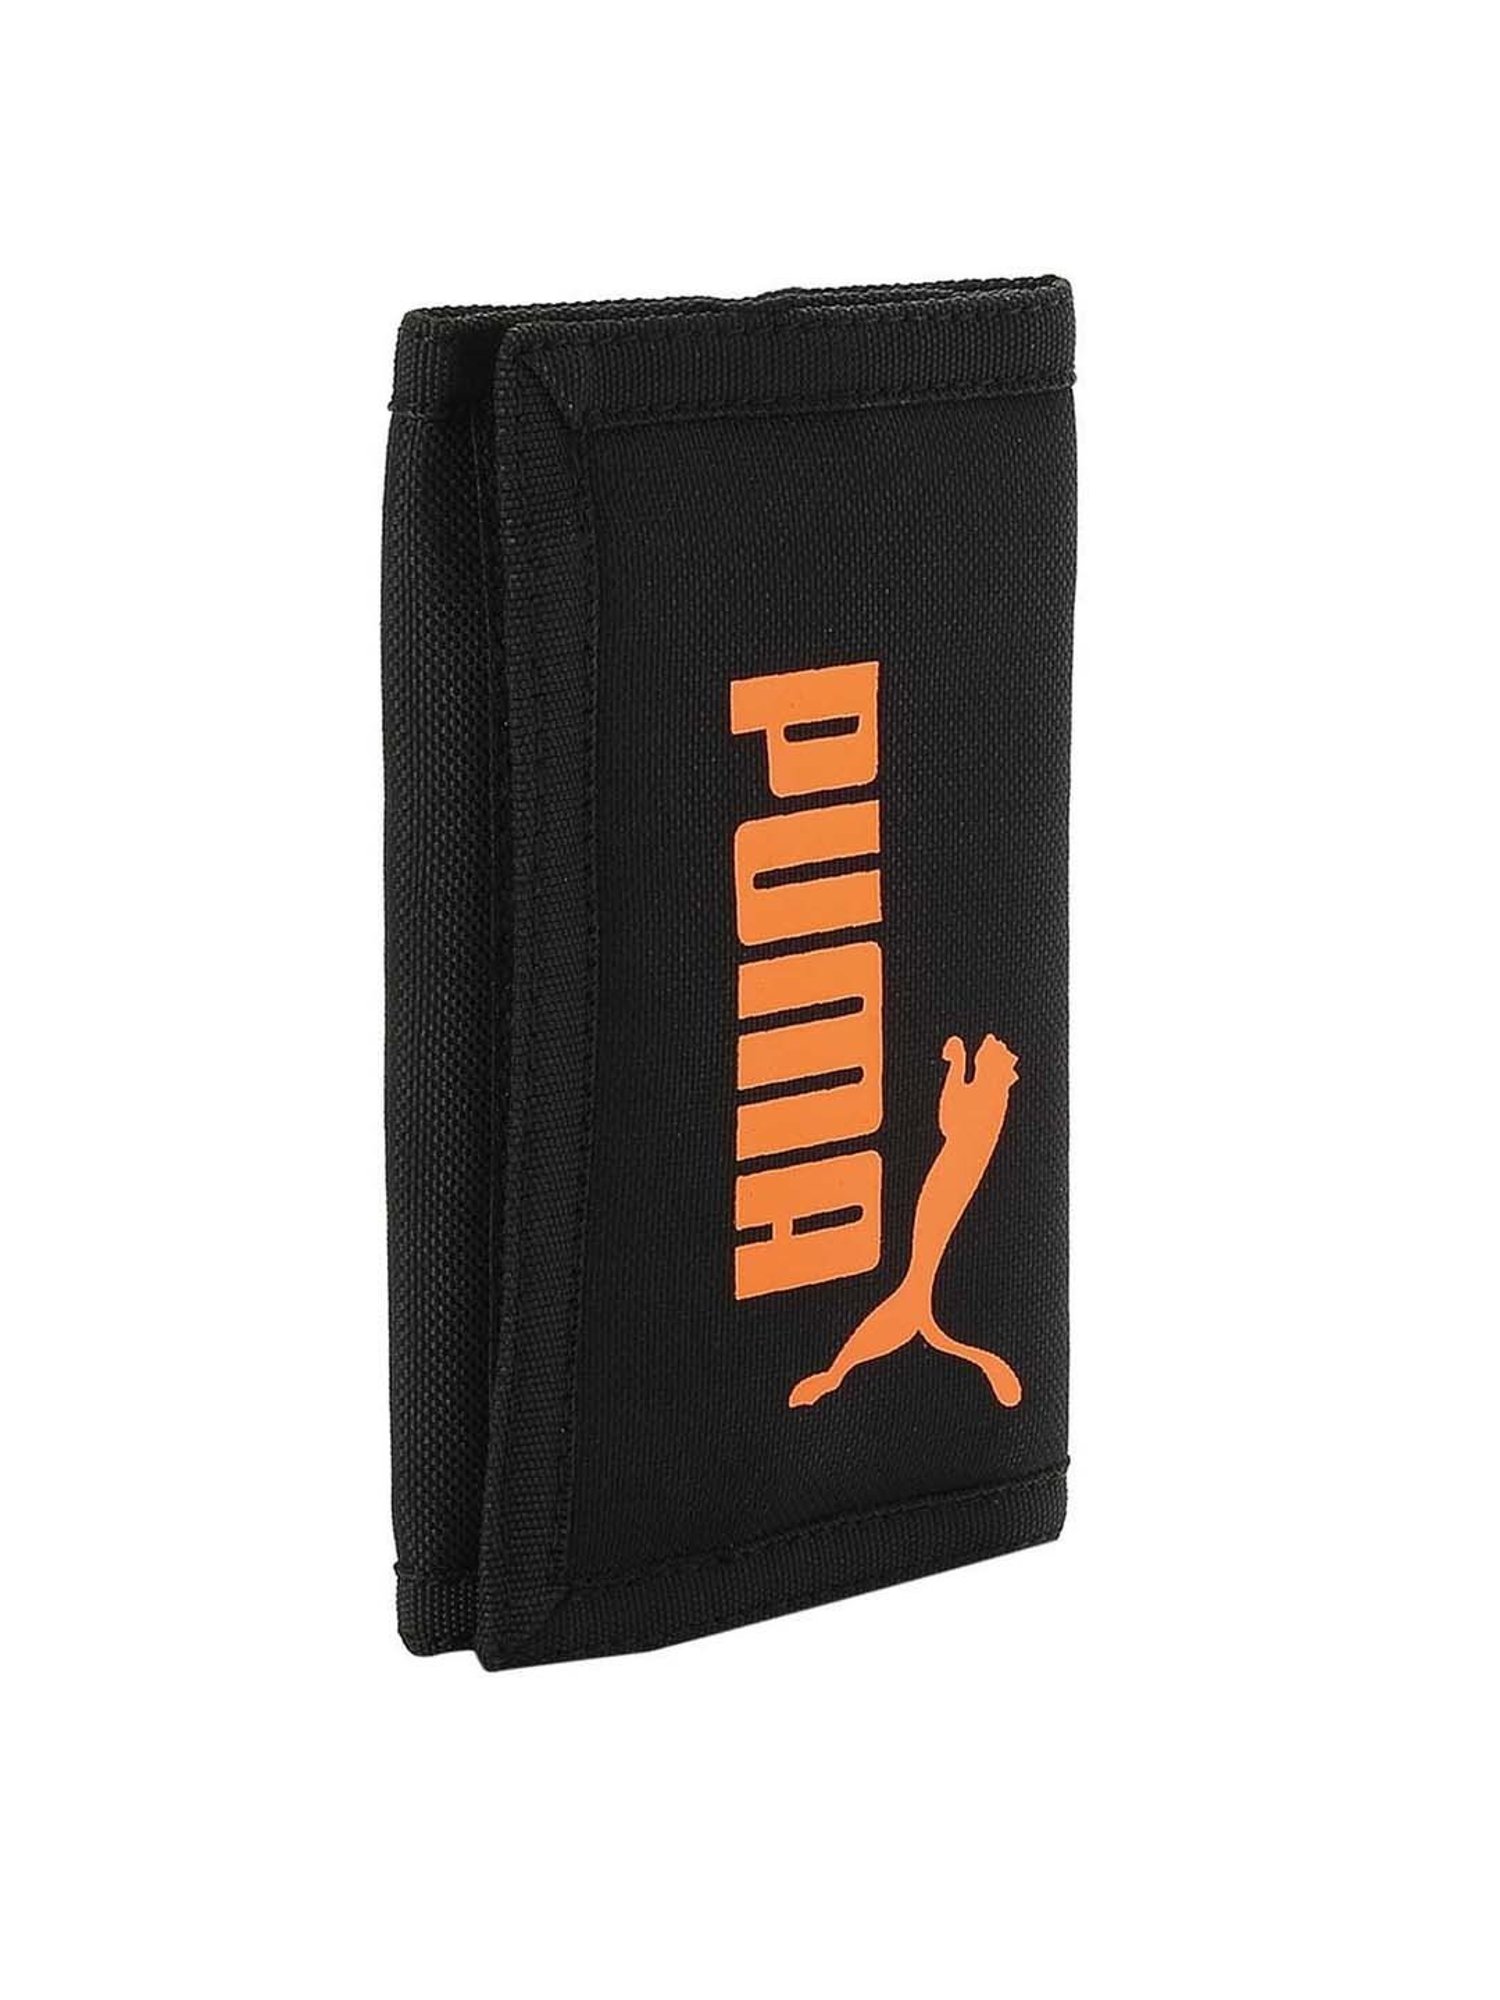 Buy Puma Polyester Unisex-Adult Phase Wallet, Black, X (7561701) at  Amazon.in